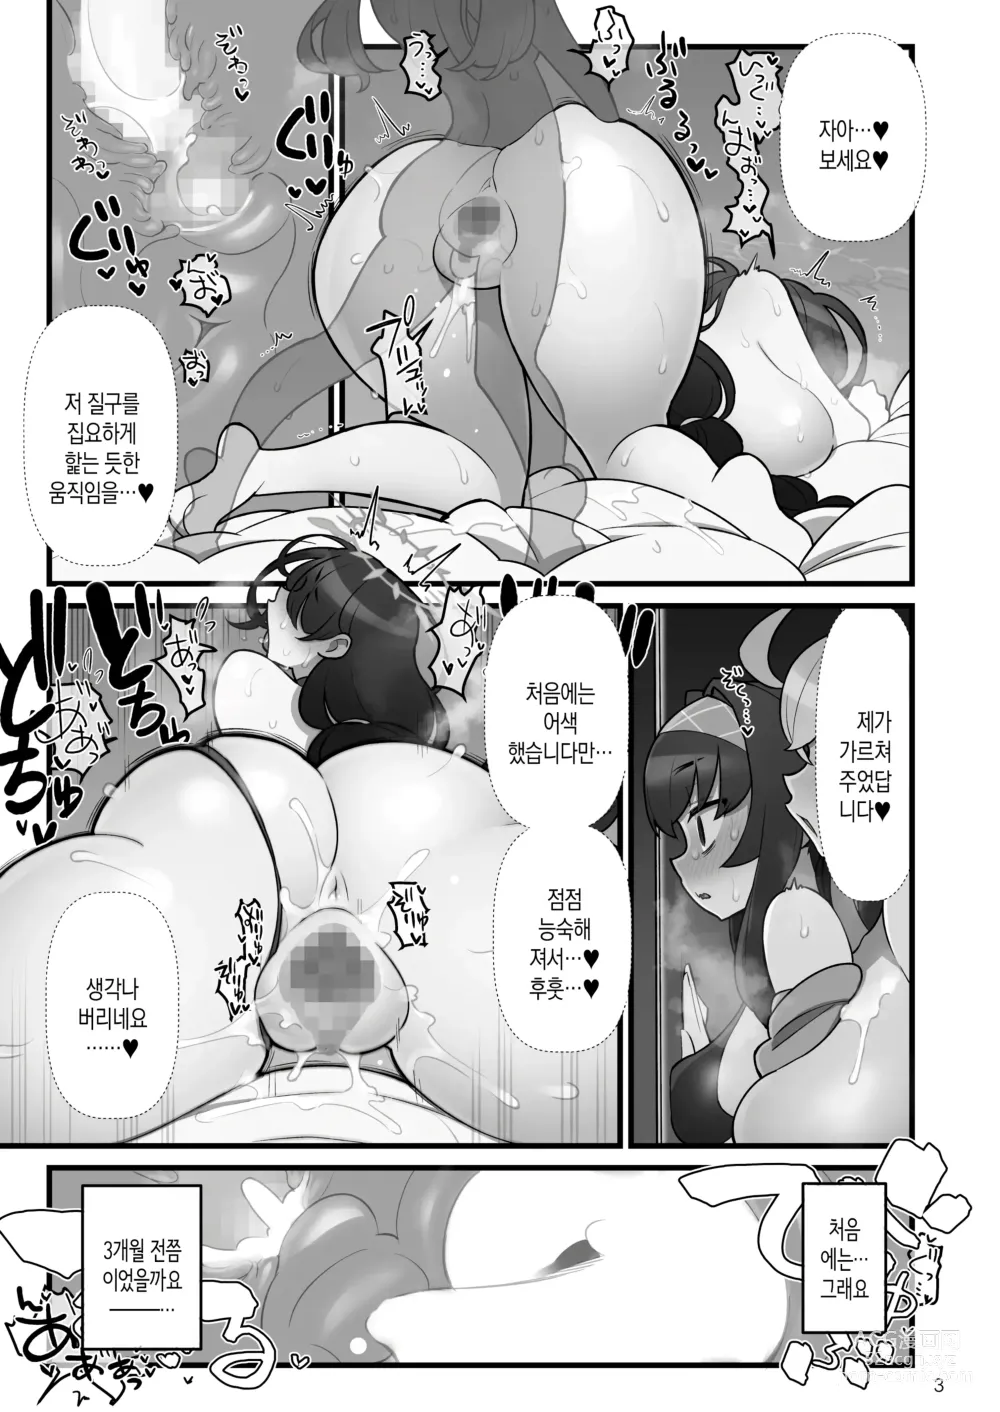 Page 4 of doujinshi 코하루 후타나루